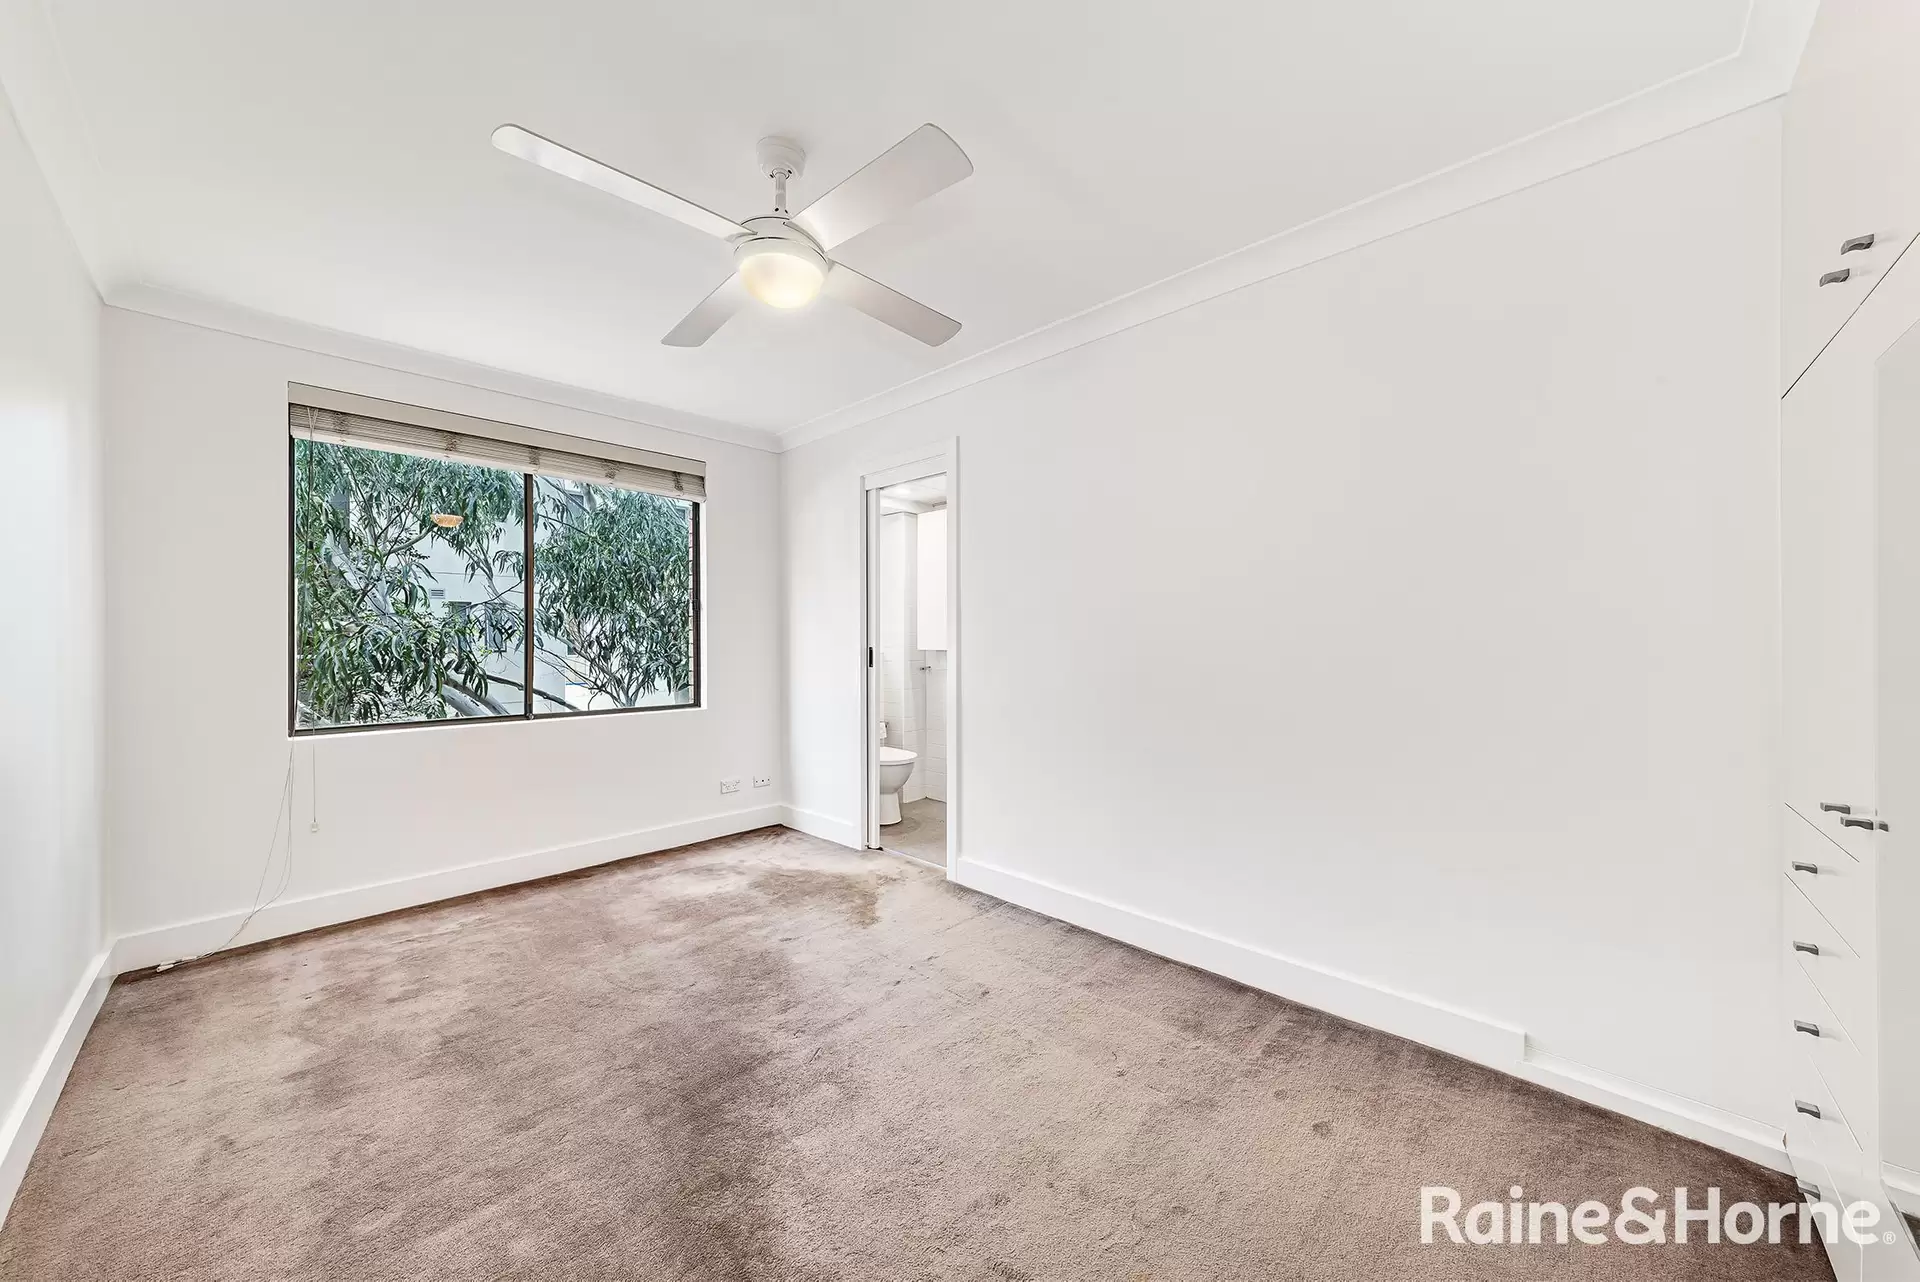 6/84 Melody Street, Coogee Leased by Raine & Horne Randwick | Coogee - image 1